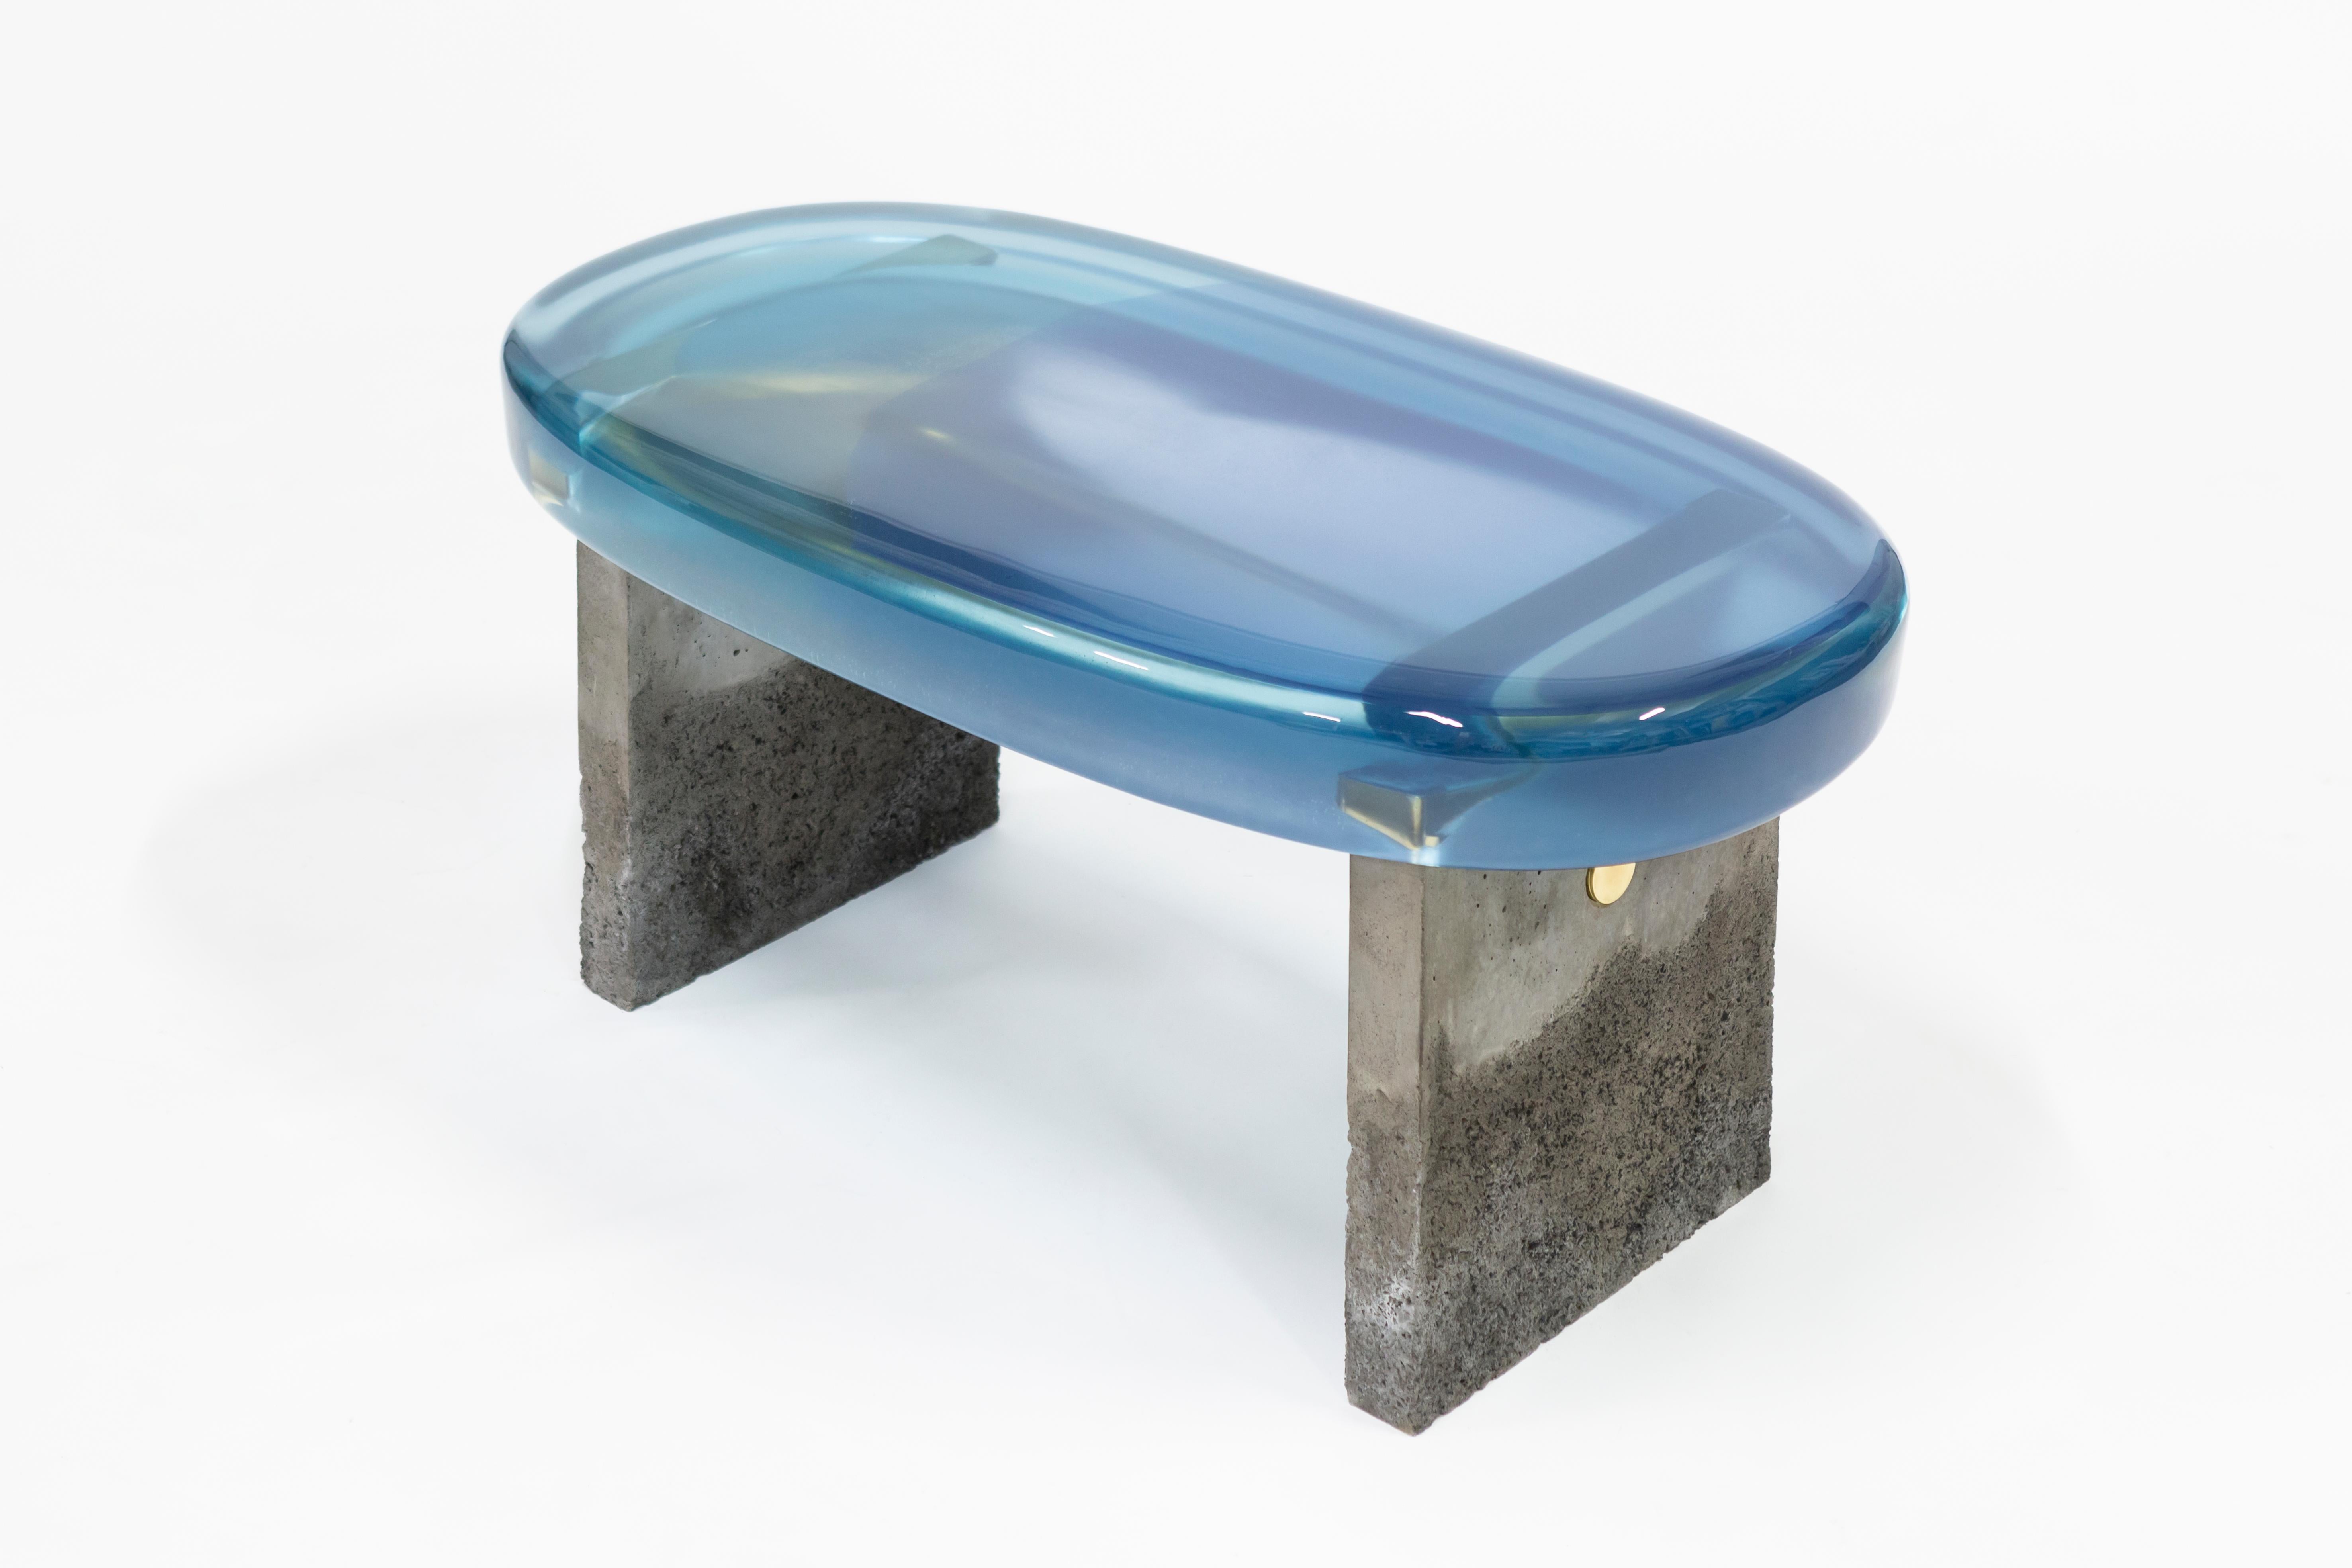 Dialoghi Mimetici Collection by Draga&Aurel:

Bench in concrete with details obtained thought a technique involving the corrosion of sea salt. Top in cast resin. Details in brass. Handcrafted in our Atelier in Como.
Each piece is unique.

Violet